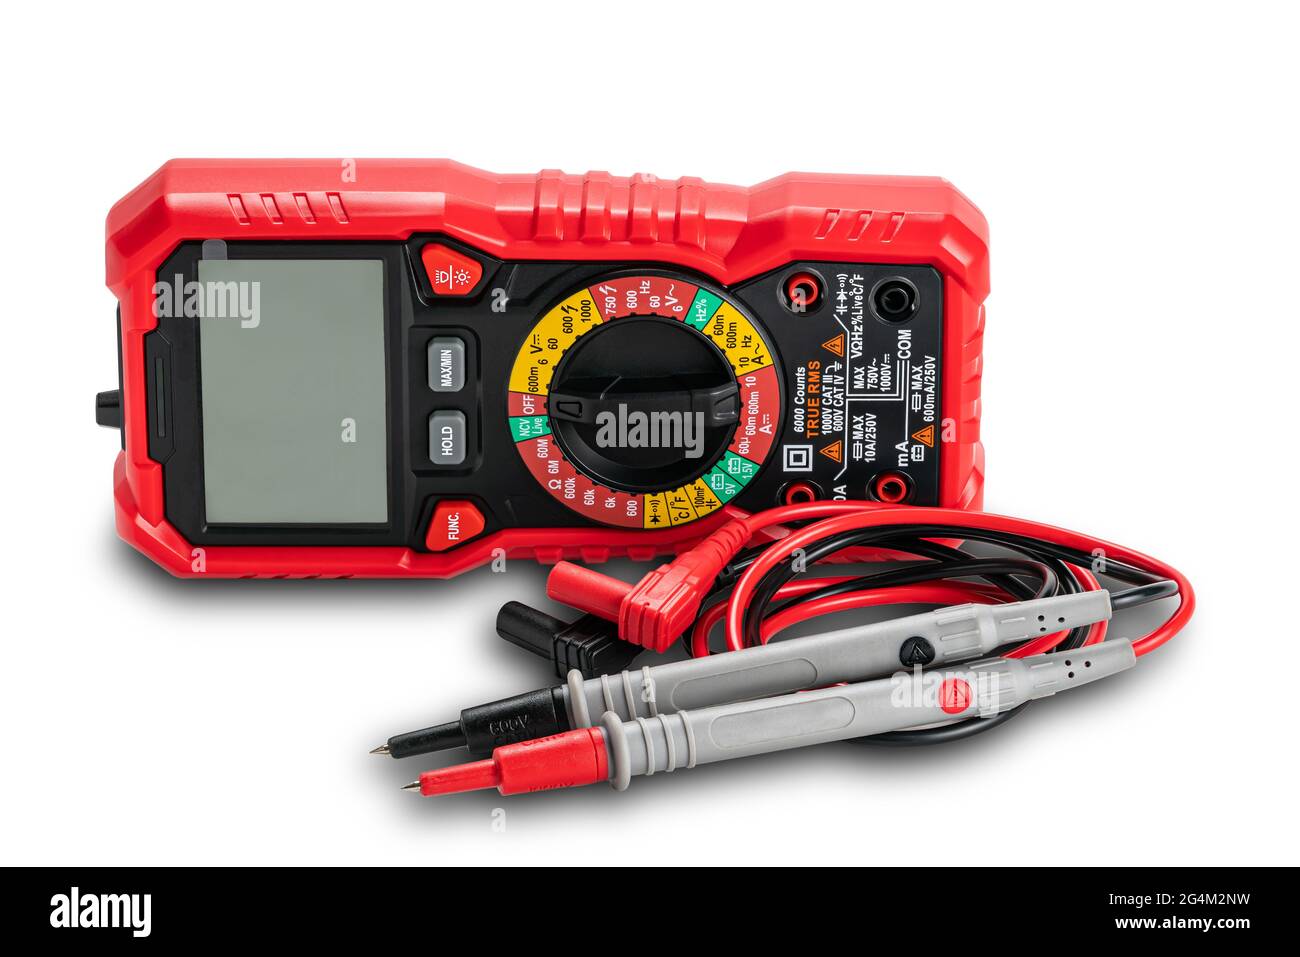 View of red portable digital multimeters or multitester with test leads and probes isolated on white background with clipping path. Stock Photo